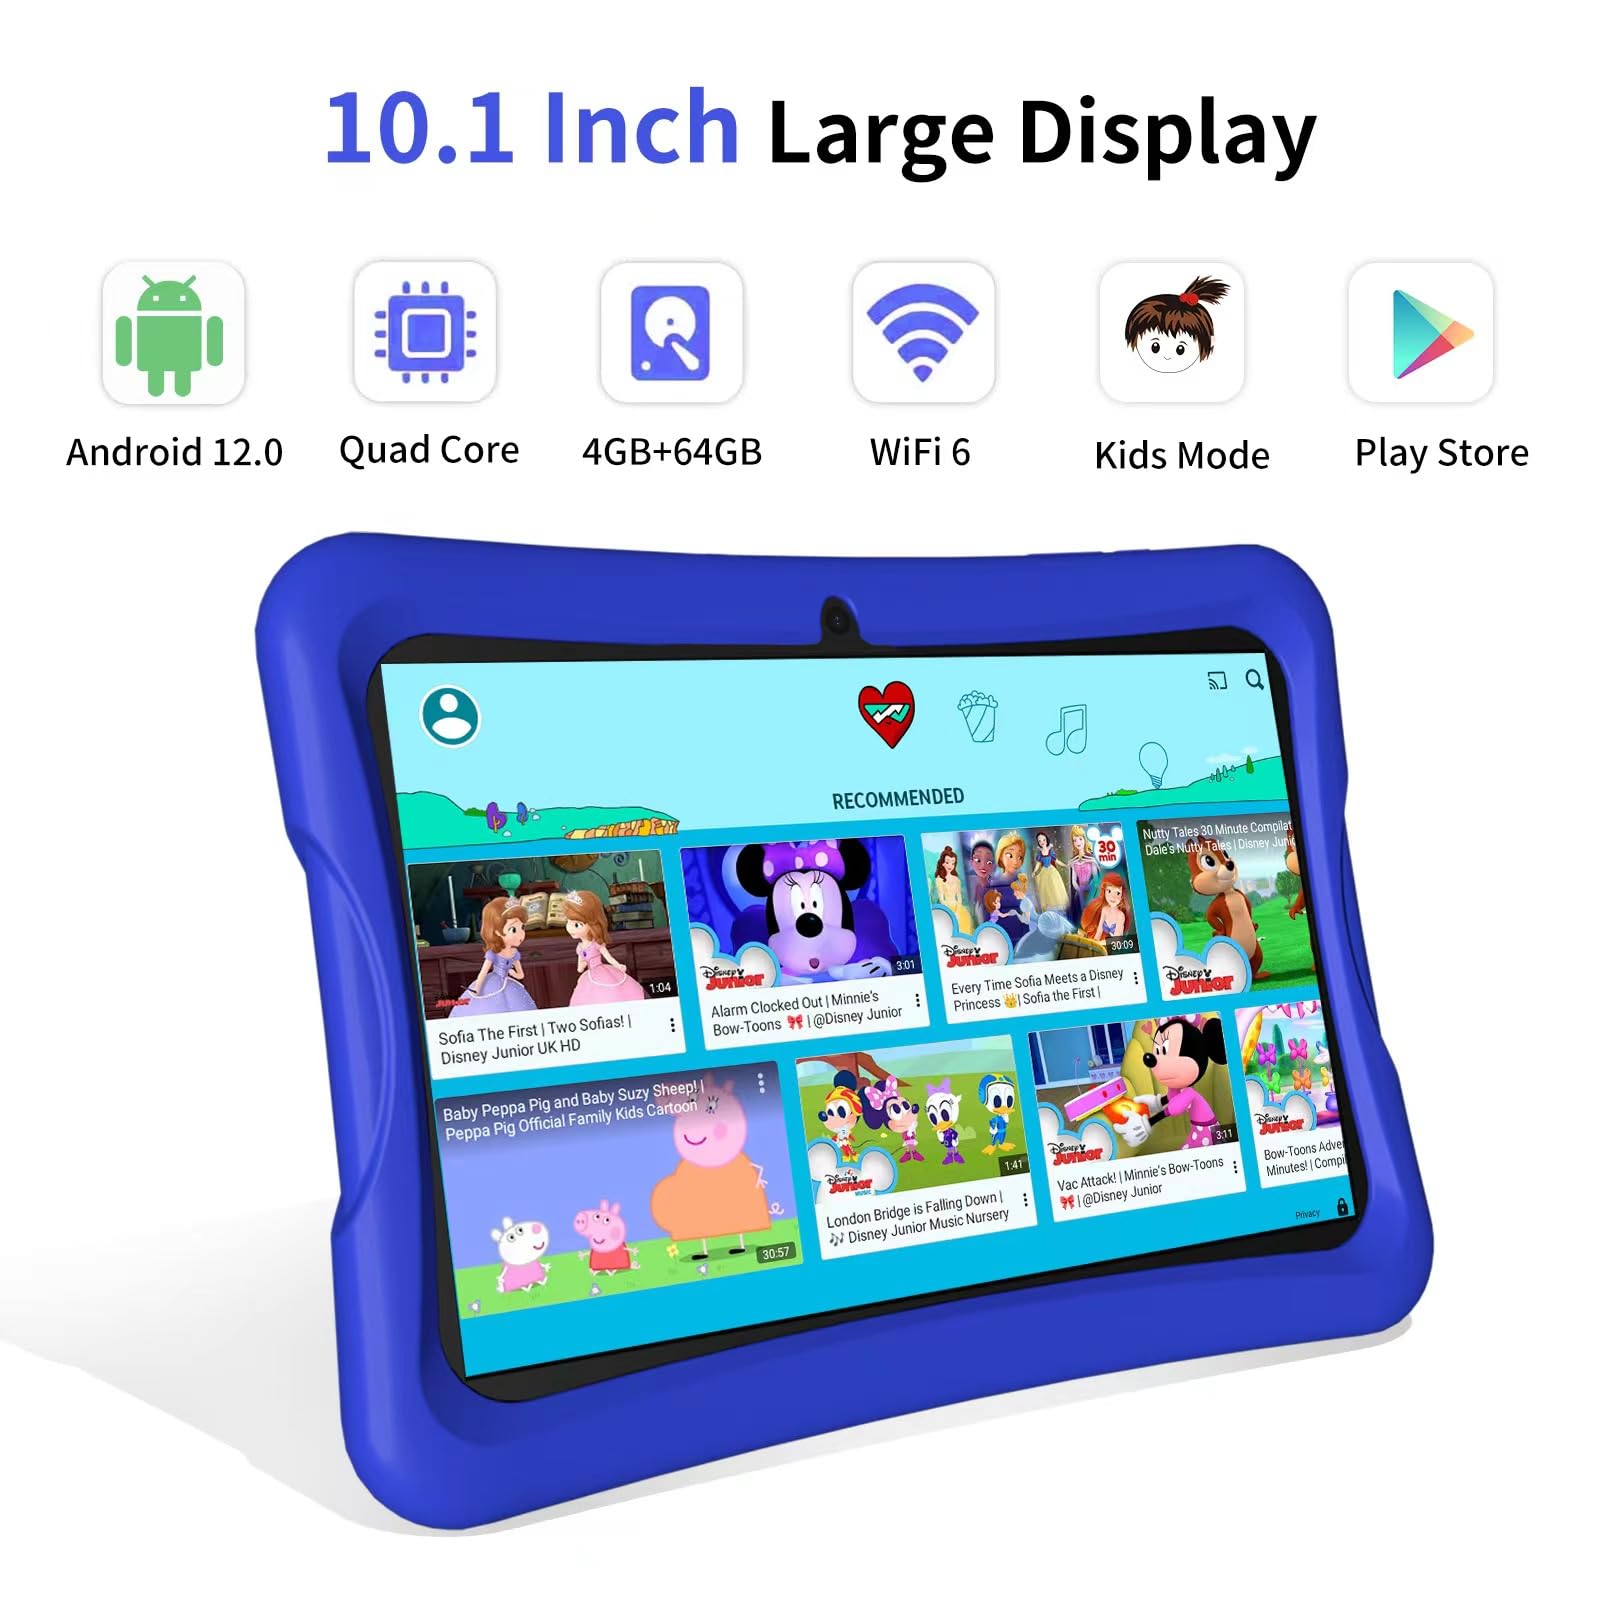 VNEIMQN Kids Tablet, 10 Inch Tablet for Kids, RAM 4GB+64GB ROM Android 12, WiFi 6, 12H Battery, Toddler Tablet, Parental Control, 2-Year Guarantee, 1280*800 HD Display, Dual Camera with case Included